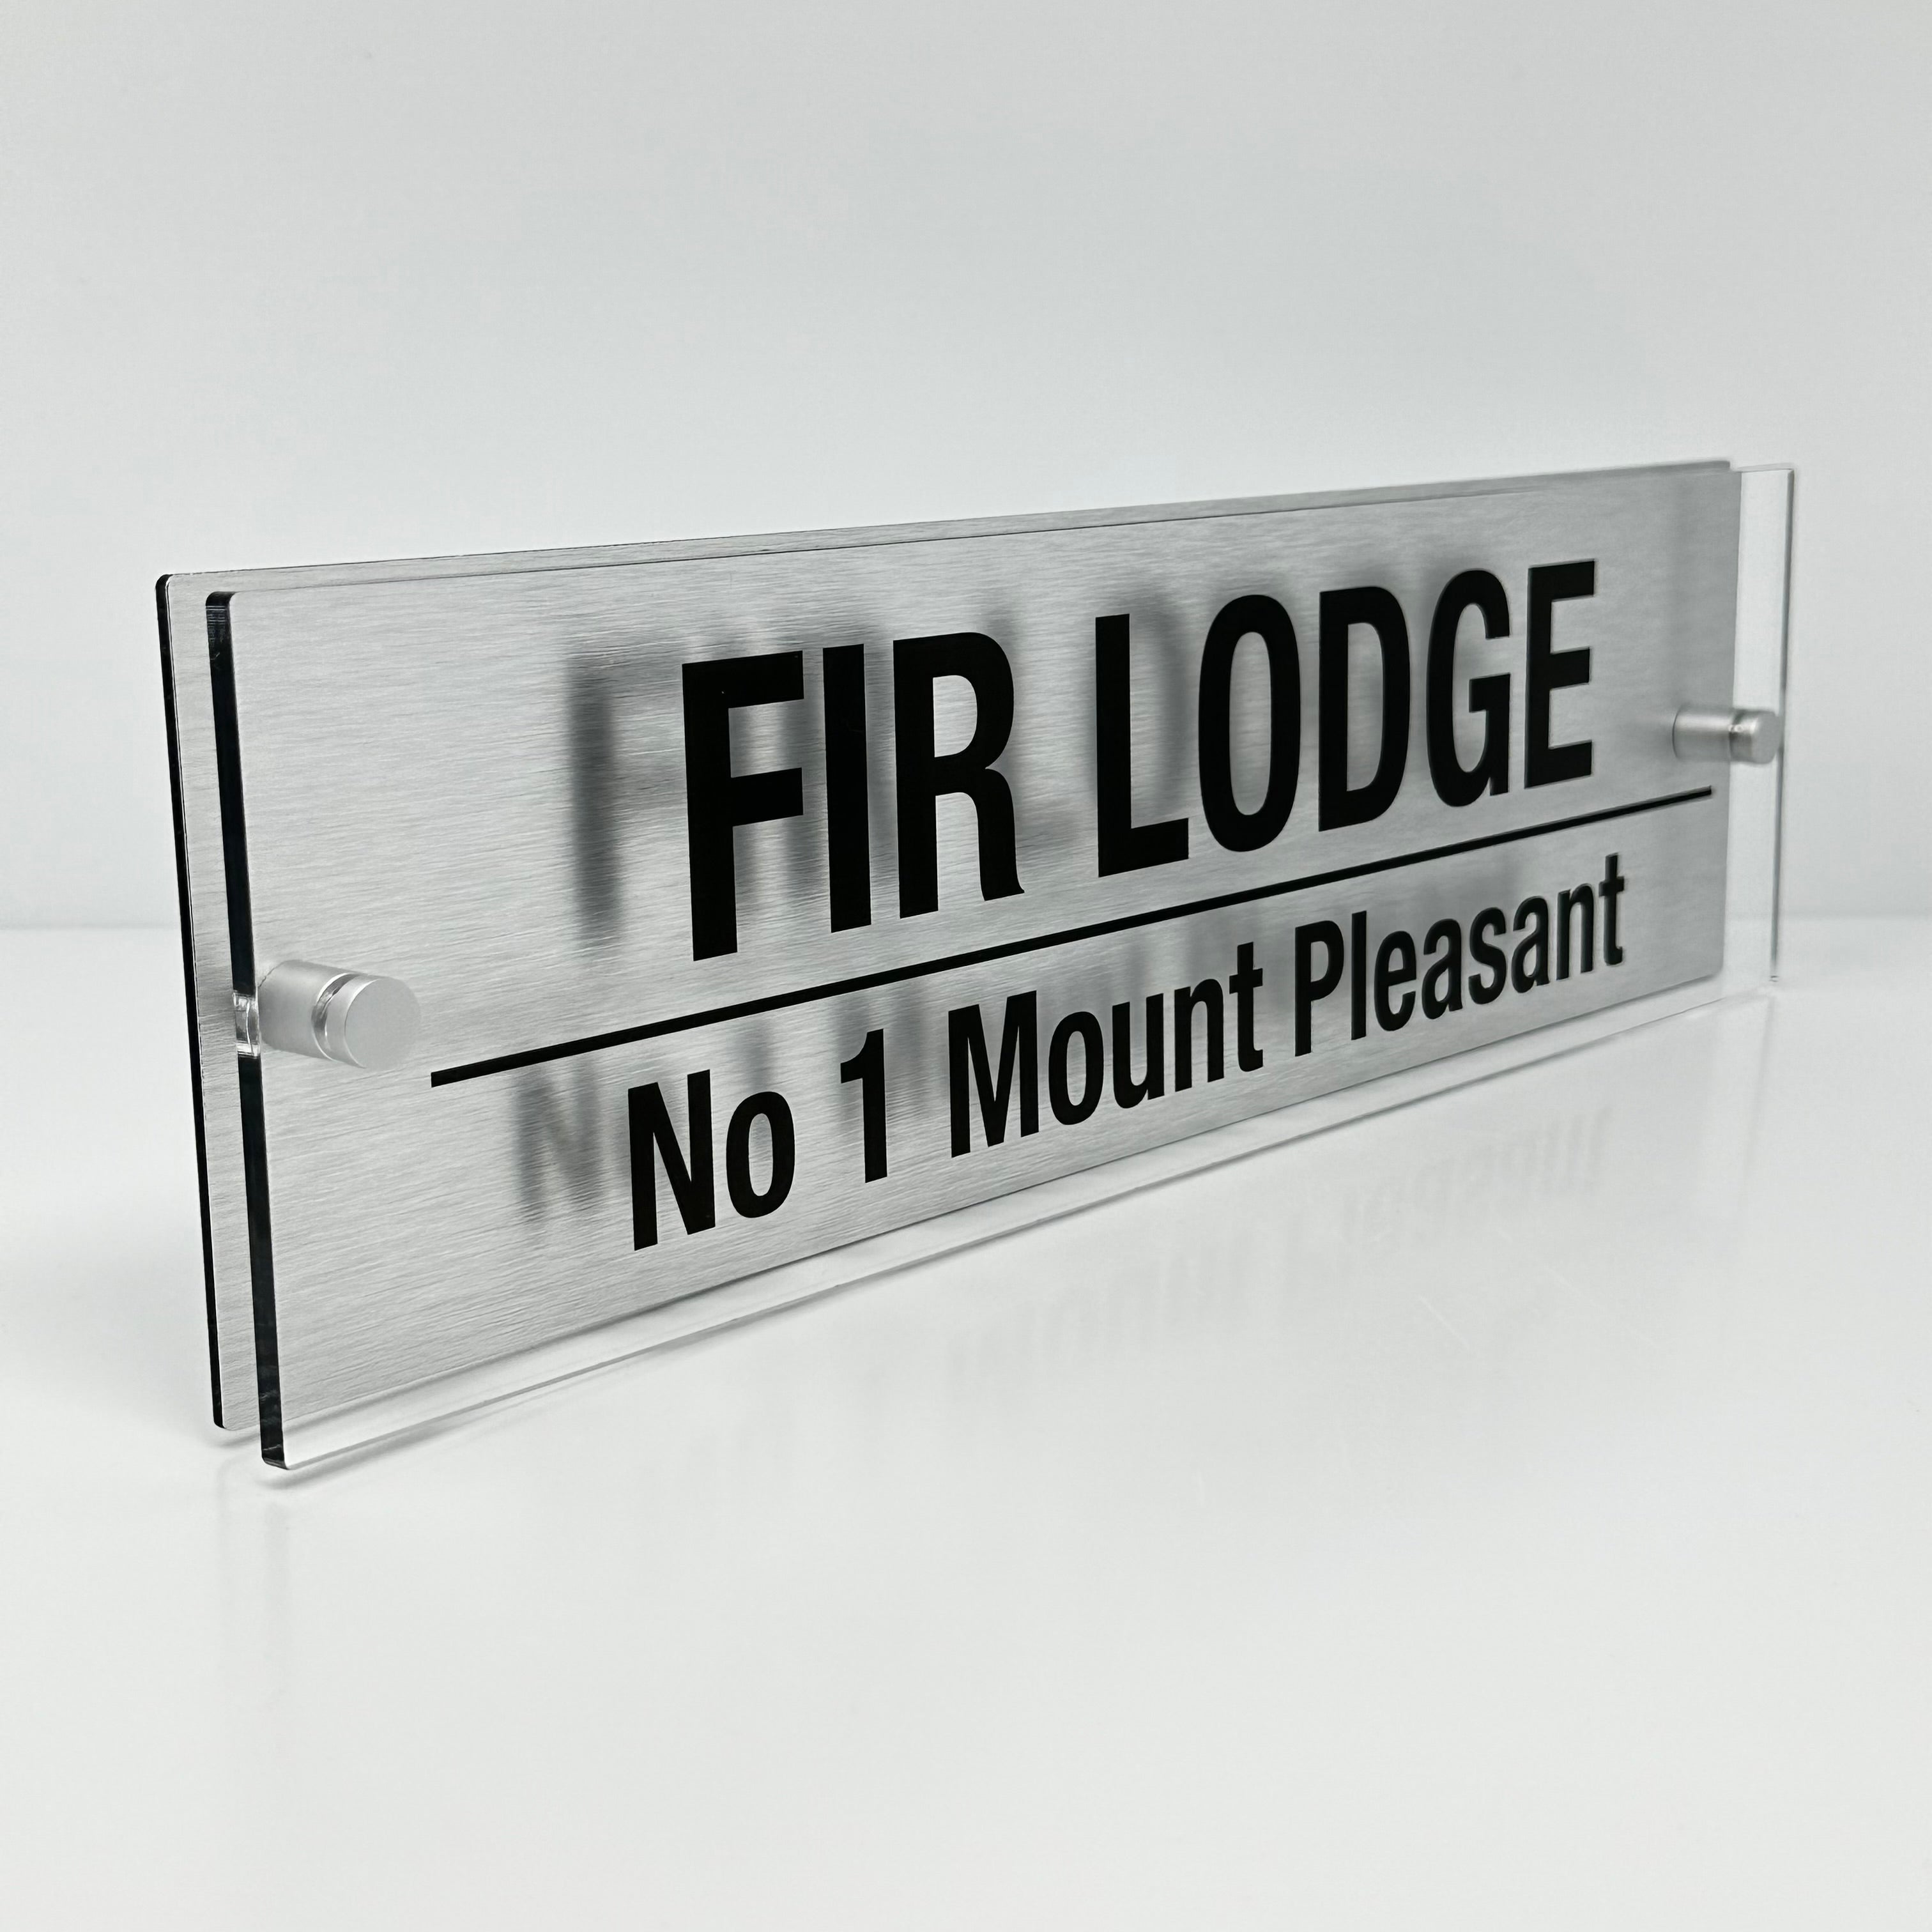 The Fir Lodge Modern House Sign with Perspex Acrylic Front, Silver Rear Panel and Satin Silver Stand Off Fixings ( Size - 42cm x 12cm )